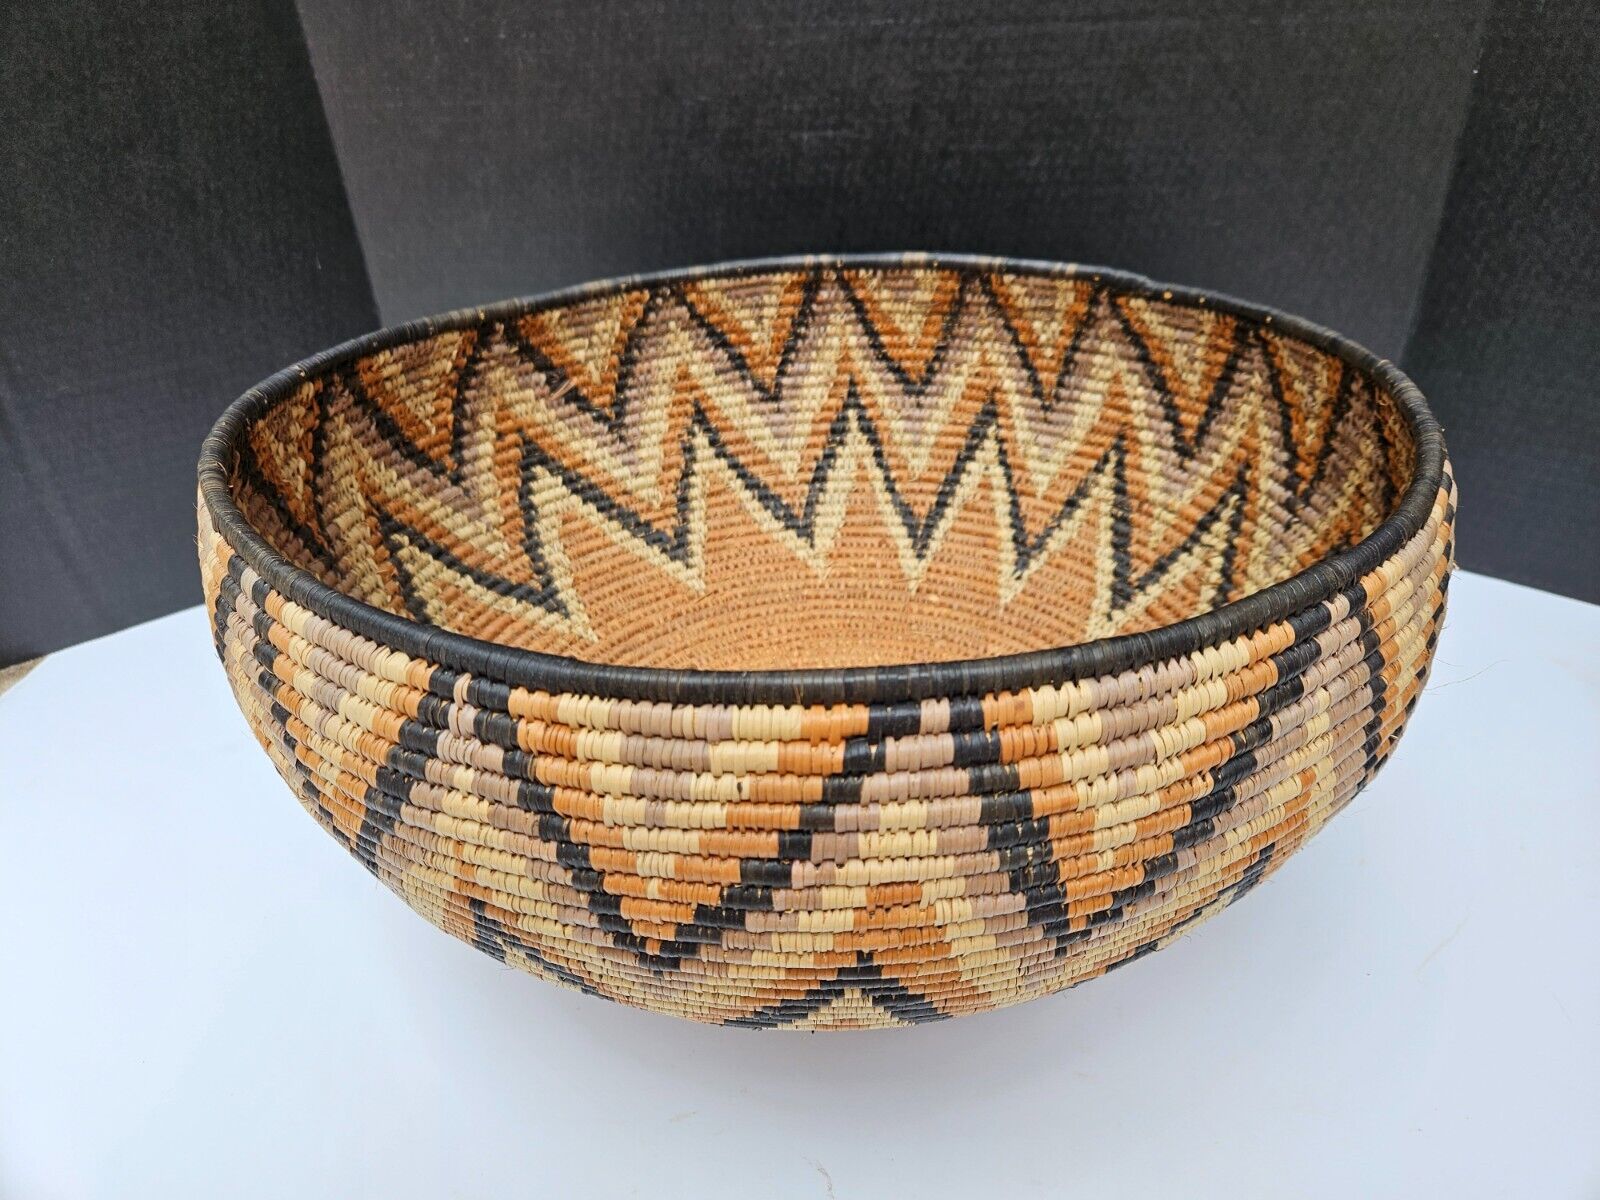 Lge Decorative Woven Coil Open Basket with Chevron Pattern -Possibl African Zulu